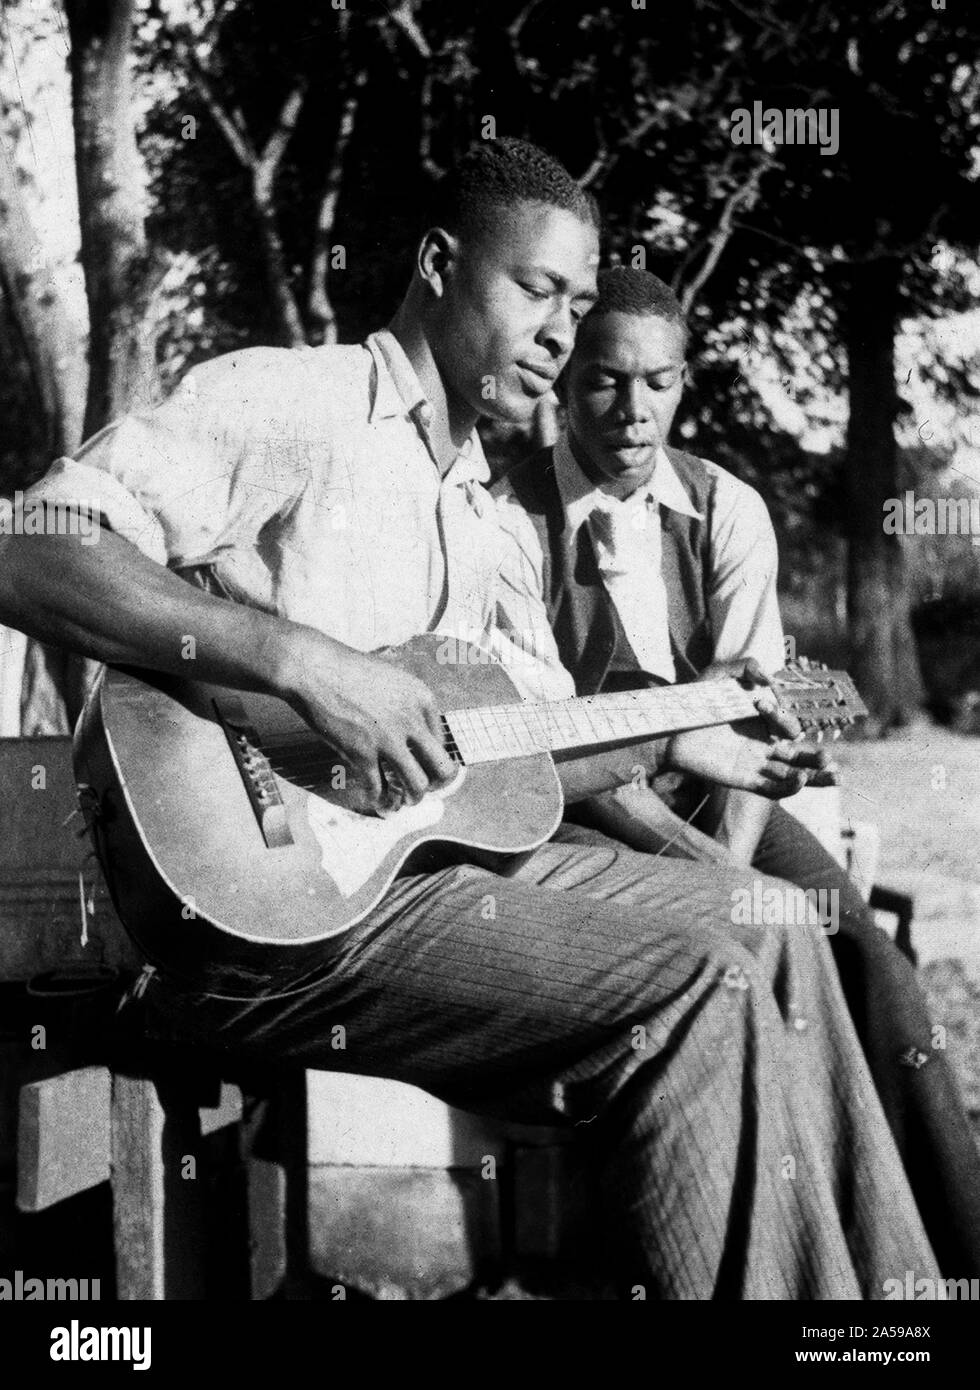 African american guitarists Black and White Stock Photos & Images - Alamy